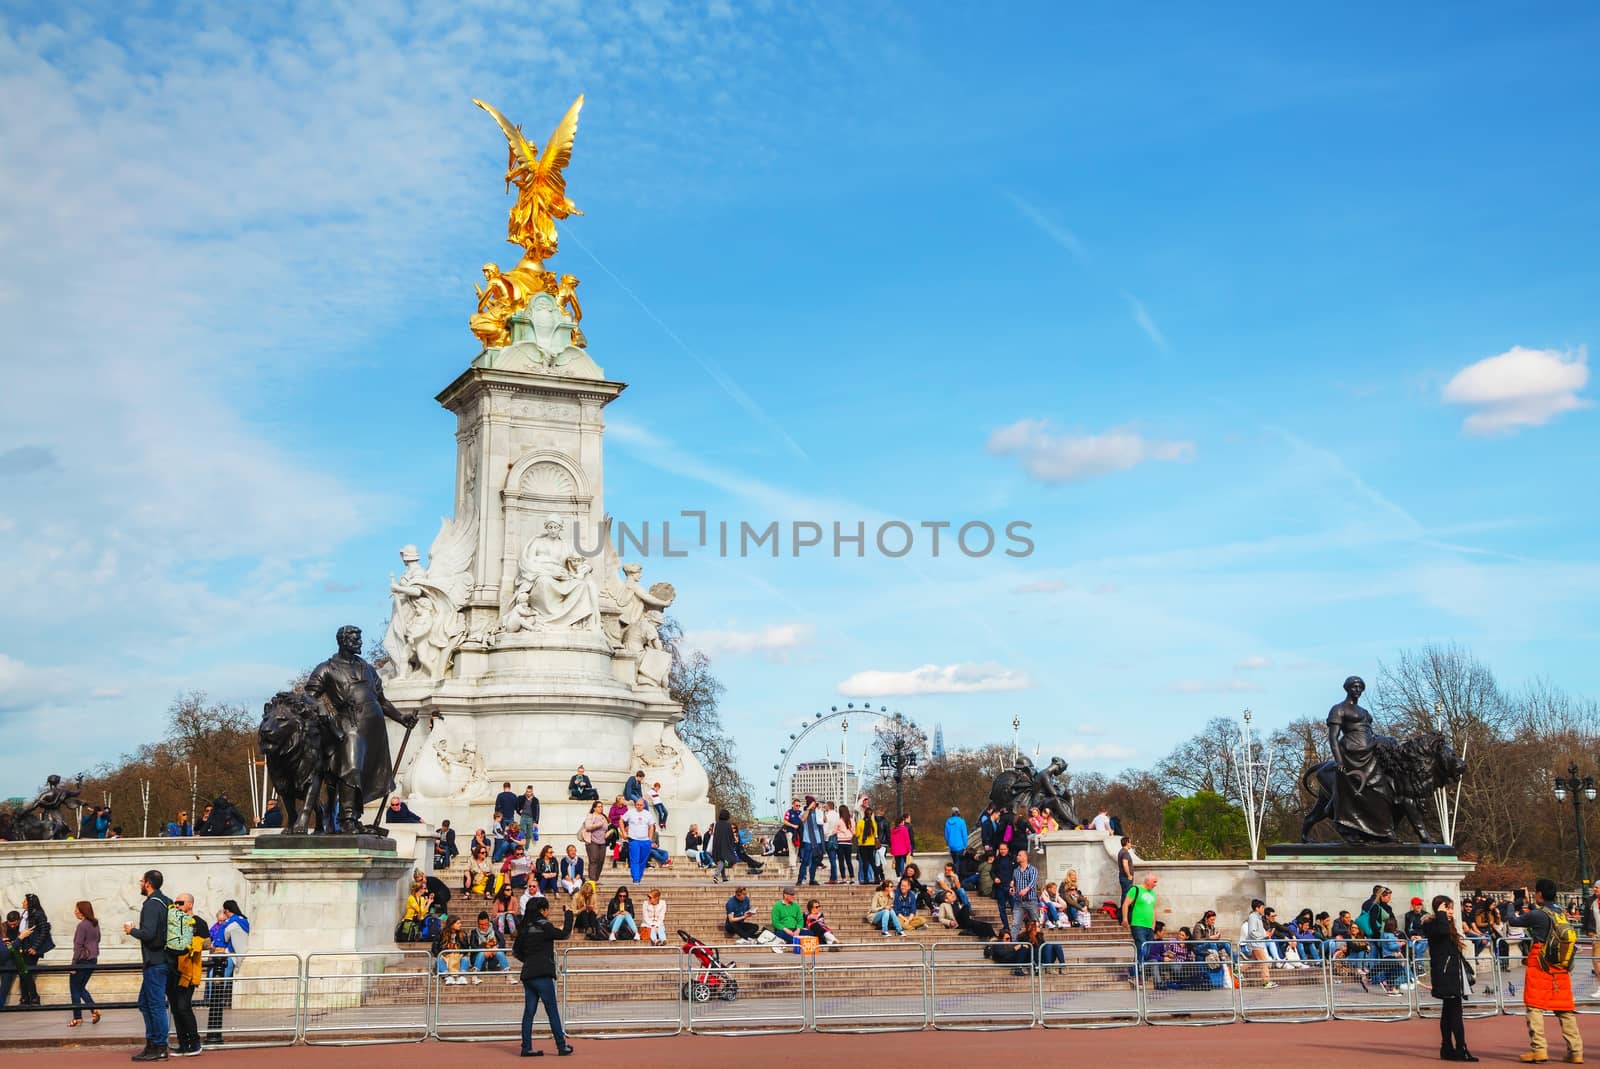 LONDON - APRIL 12: Queen Victoria memorial monument in front of the Buckingham palace on April 12, 2015 in London, UK. It's a monument to Queen Victoria, located at the end of The Mall in London.